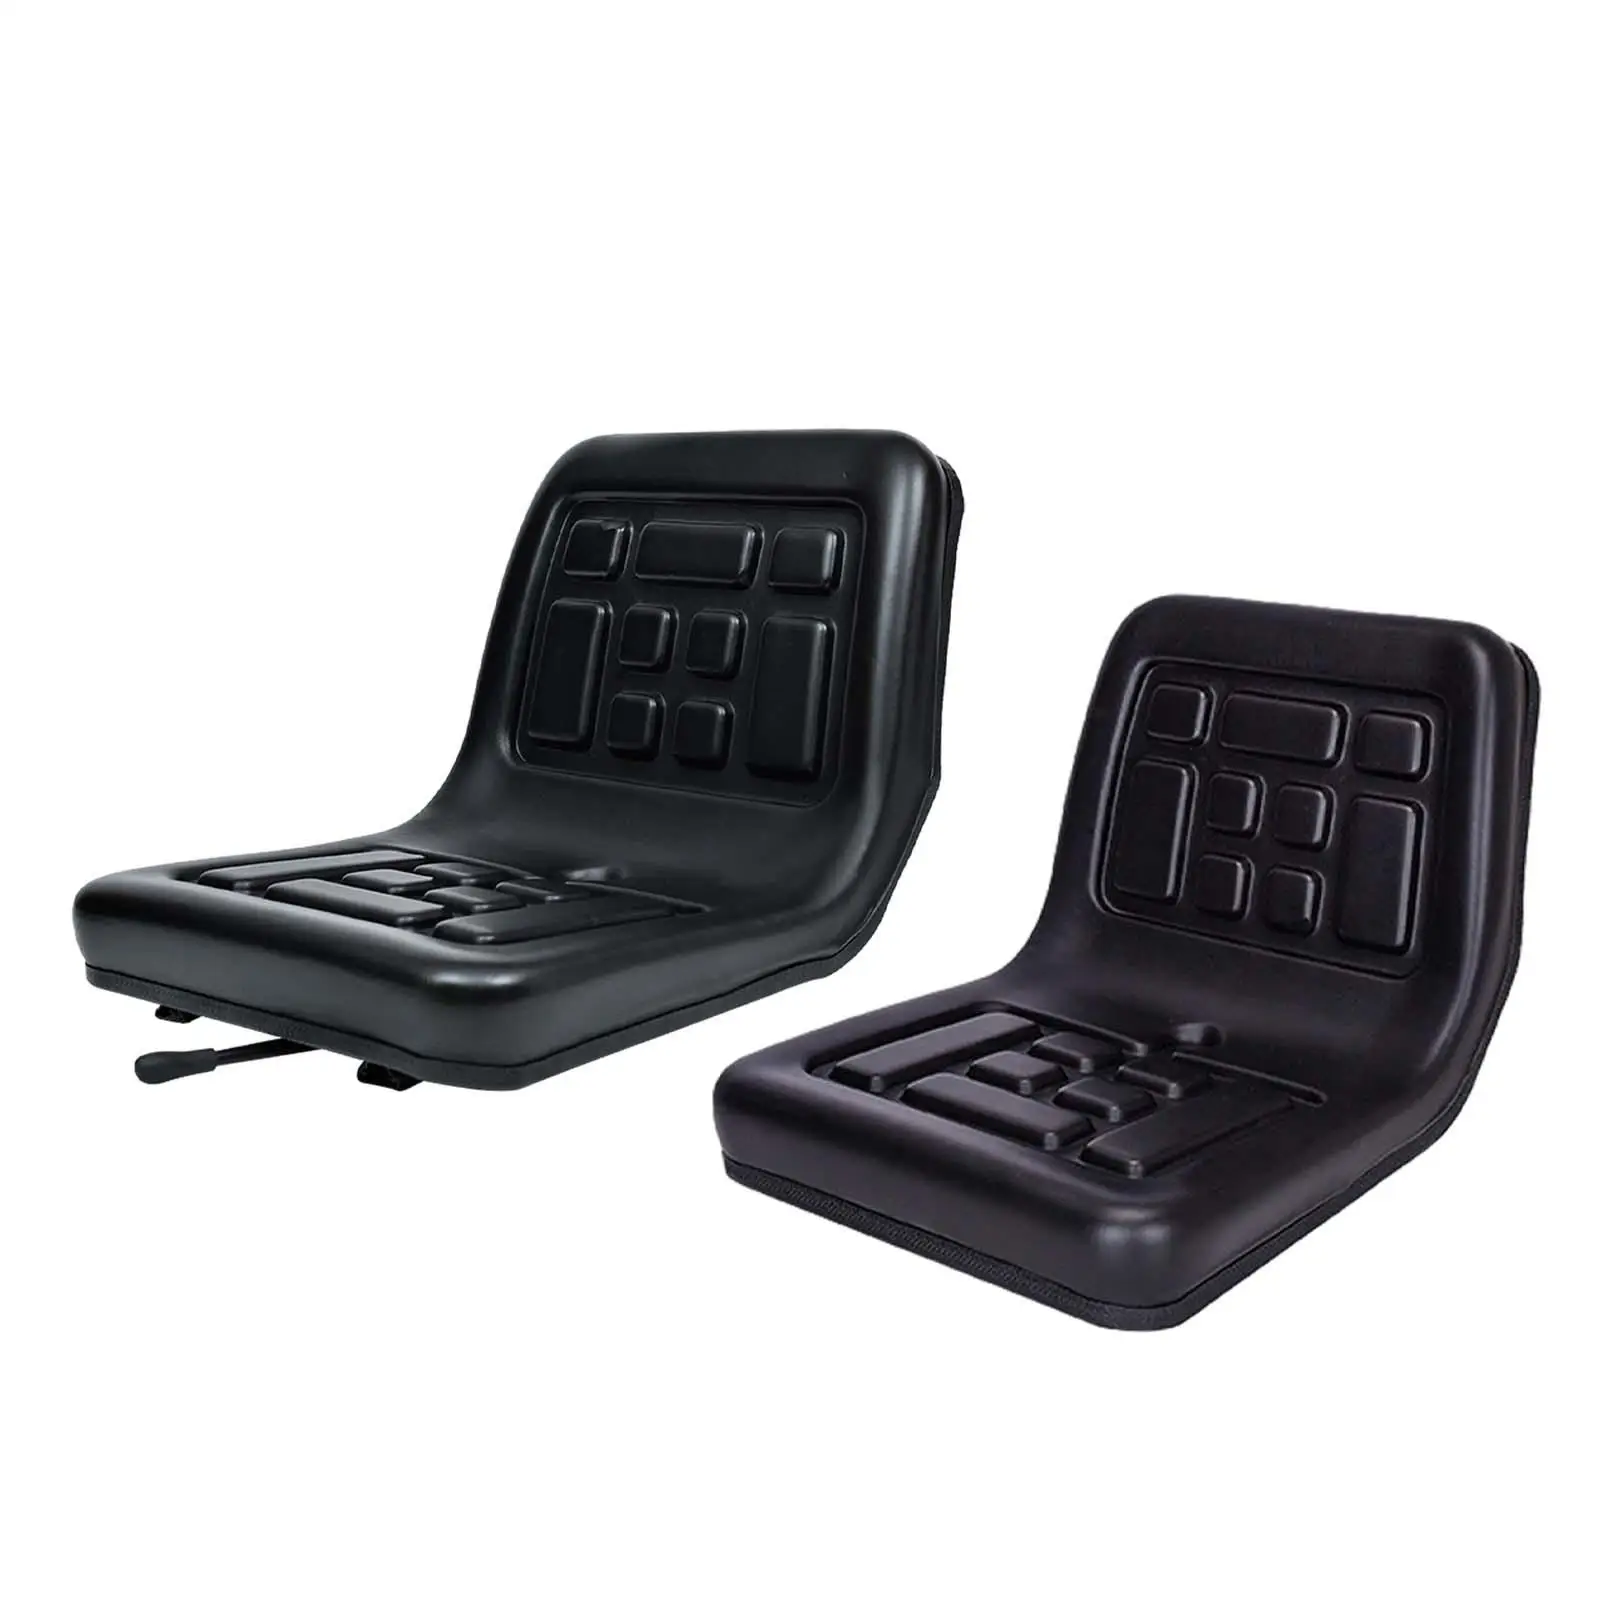 Tractor Seat Easy to Install PU Leather Harvesters Seat for Loader Rice Transplanters Tractor Forklift Road Sweepers Vehicles